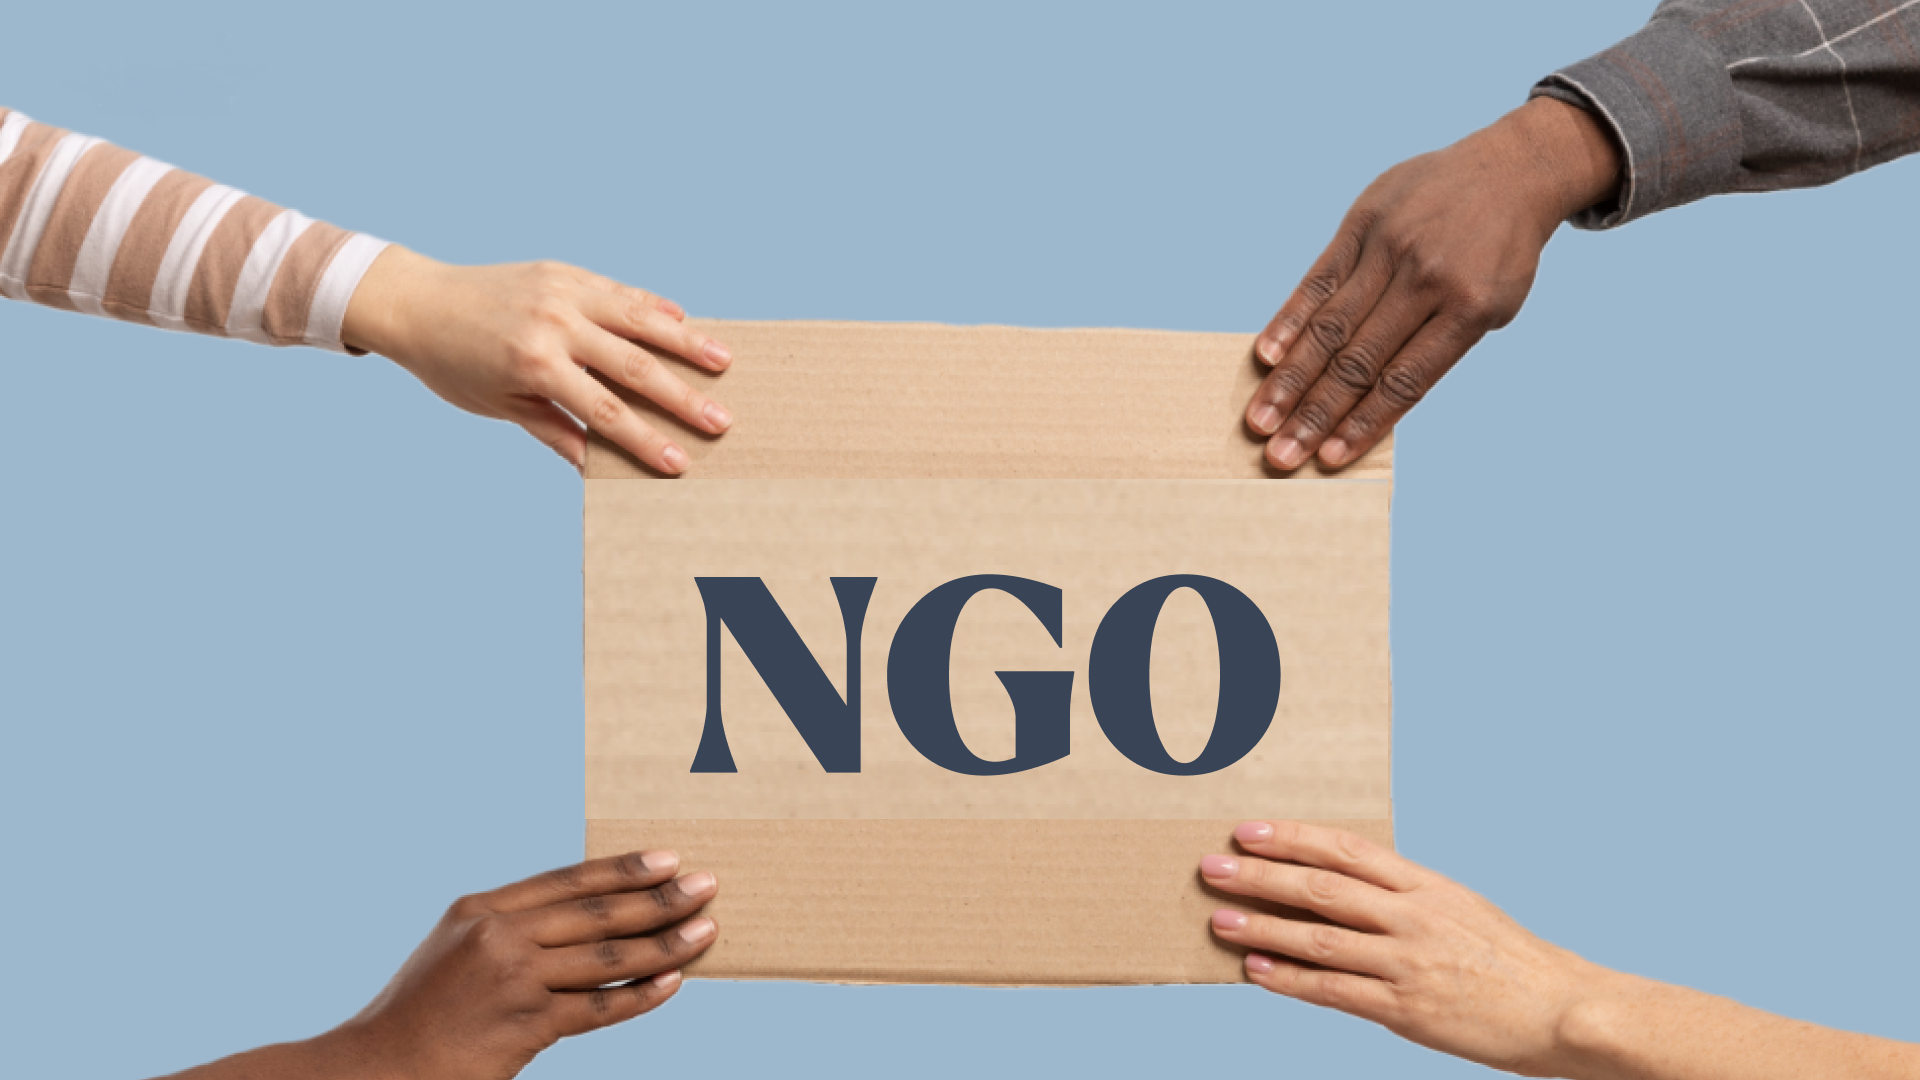 Easy Ways To Make Ngo Advertisements Faster